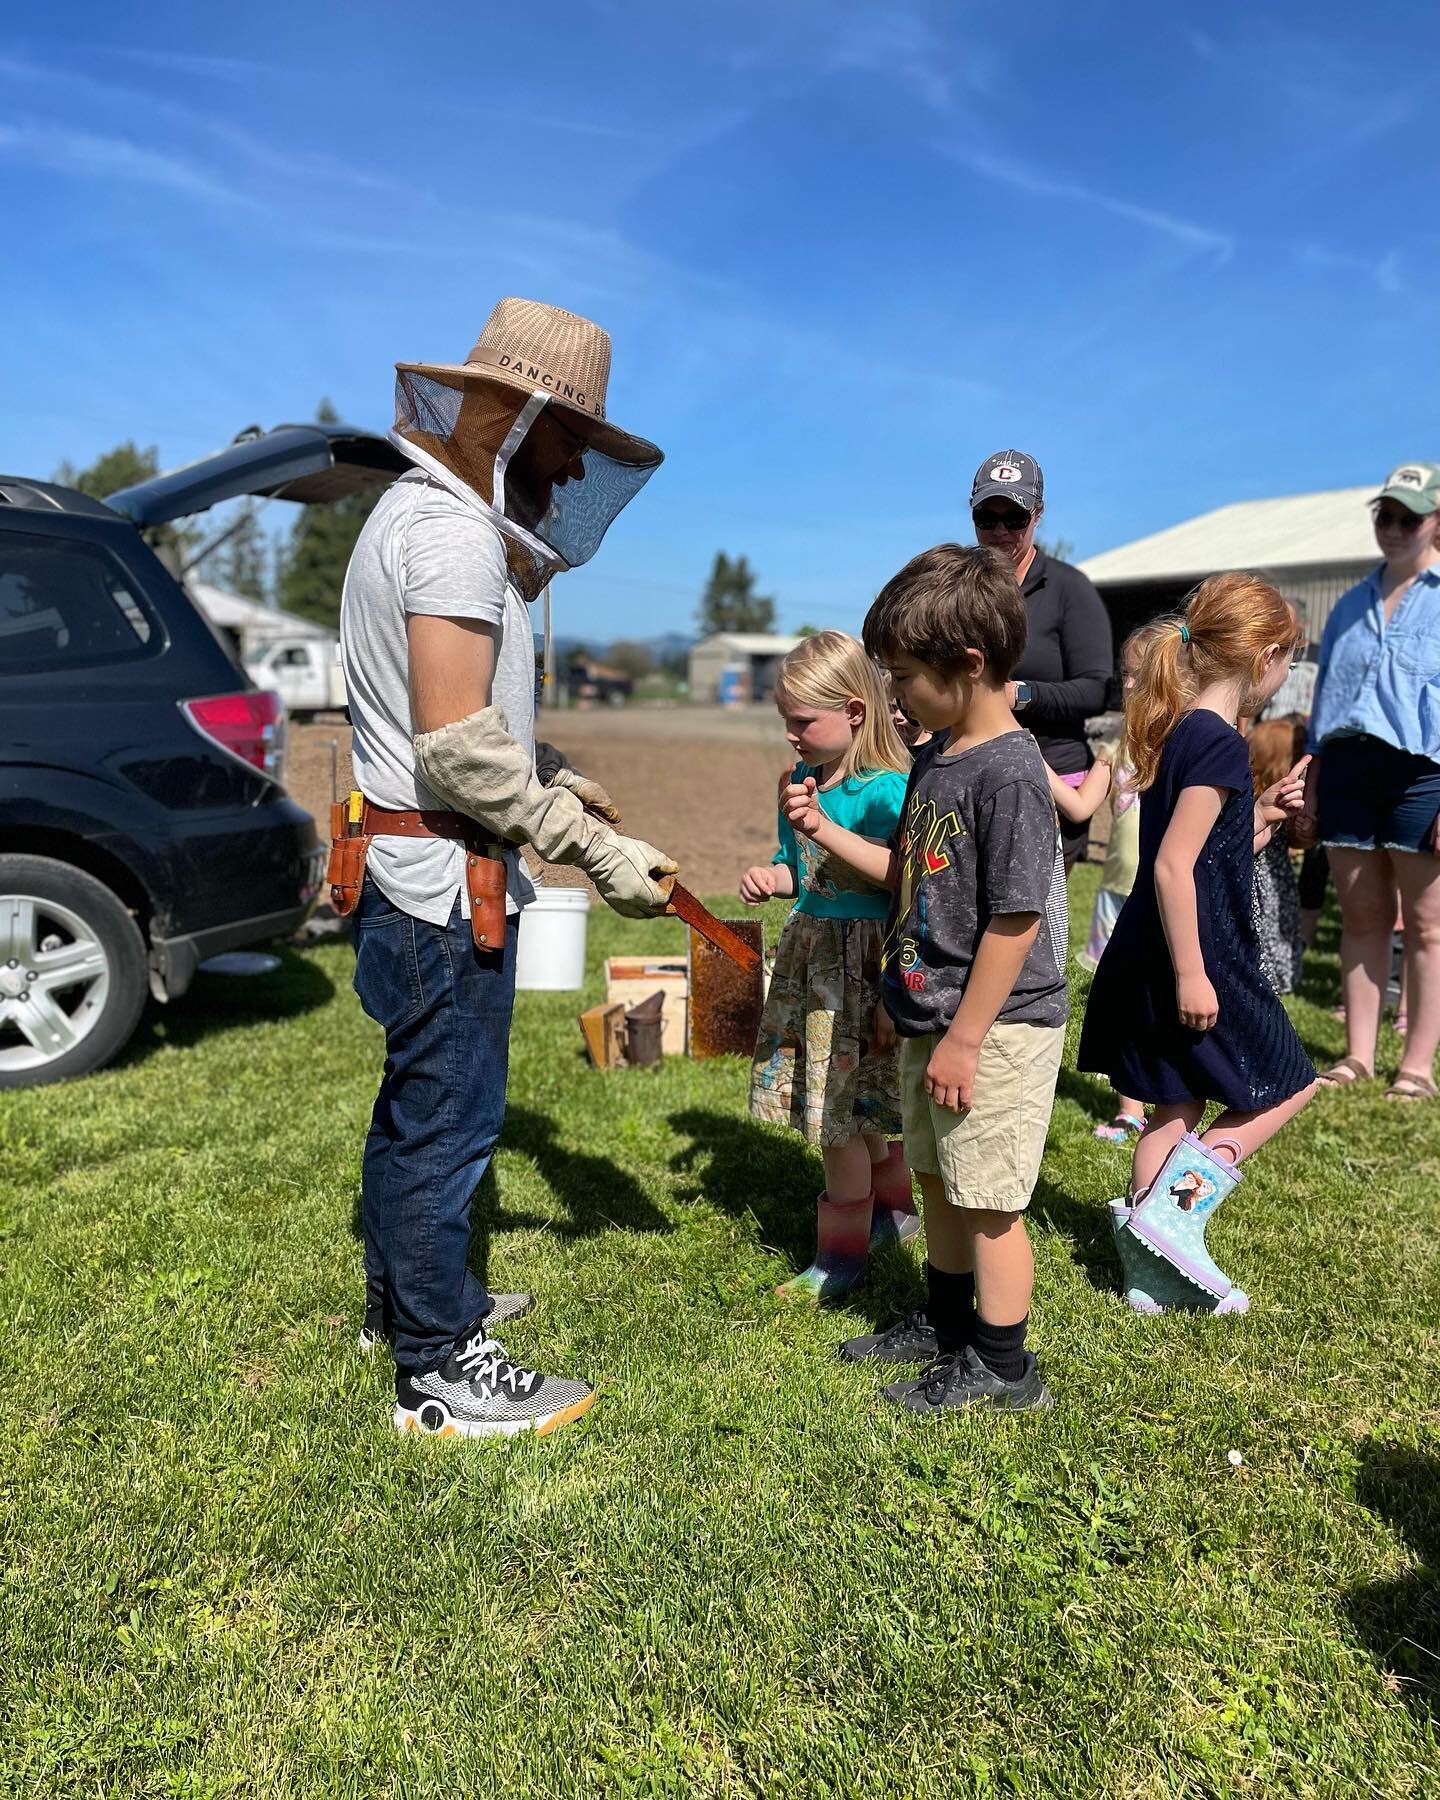 Today was especially meaningful. Making an impact and inspiring the next generation of farmers, bee keepers and stewards of the land alongside @eola_crest_cattle. 
.
#keepbees #mcminnvilleoregon #yamhillcounty #beekeepers